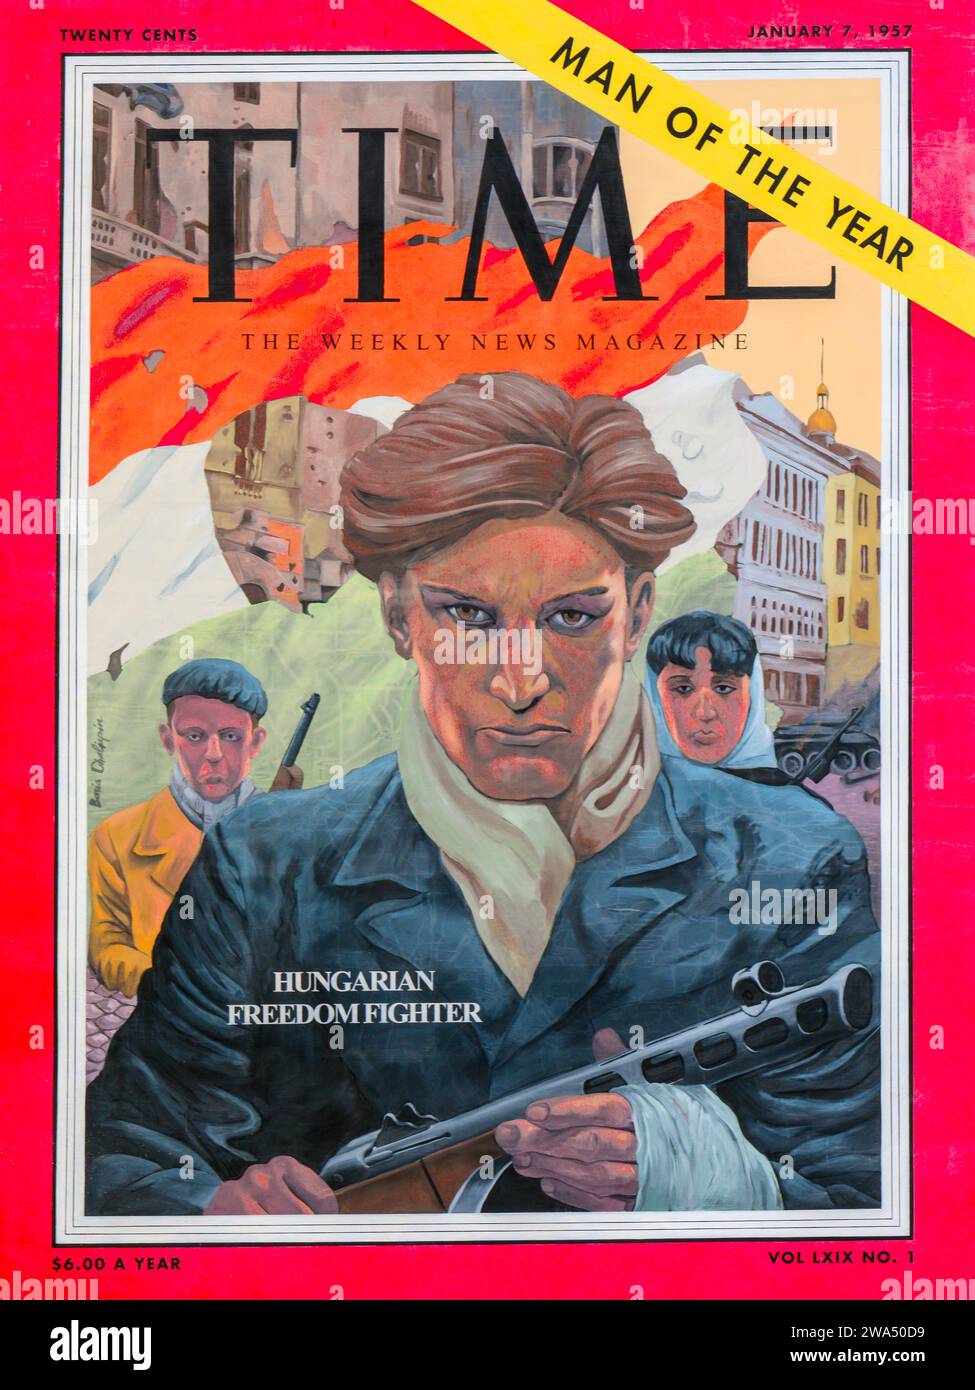 Hungarian Freedom Fighters on Time Magazine Cover January 7 1957 Graffiti on a building's wall in Wesselenyi utca, Budapest, Hungary Stock Photo